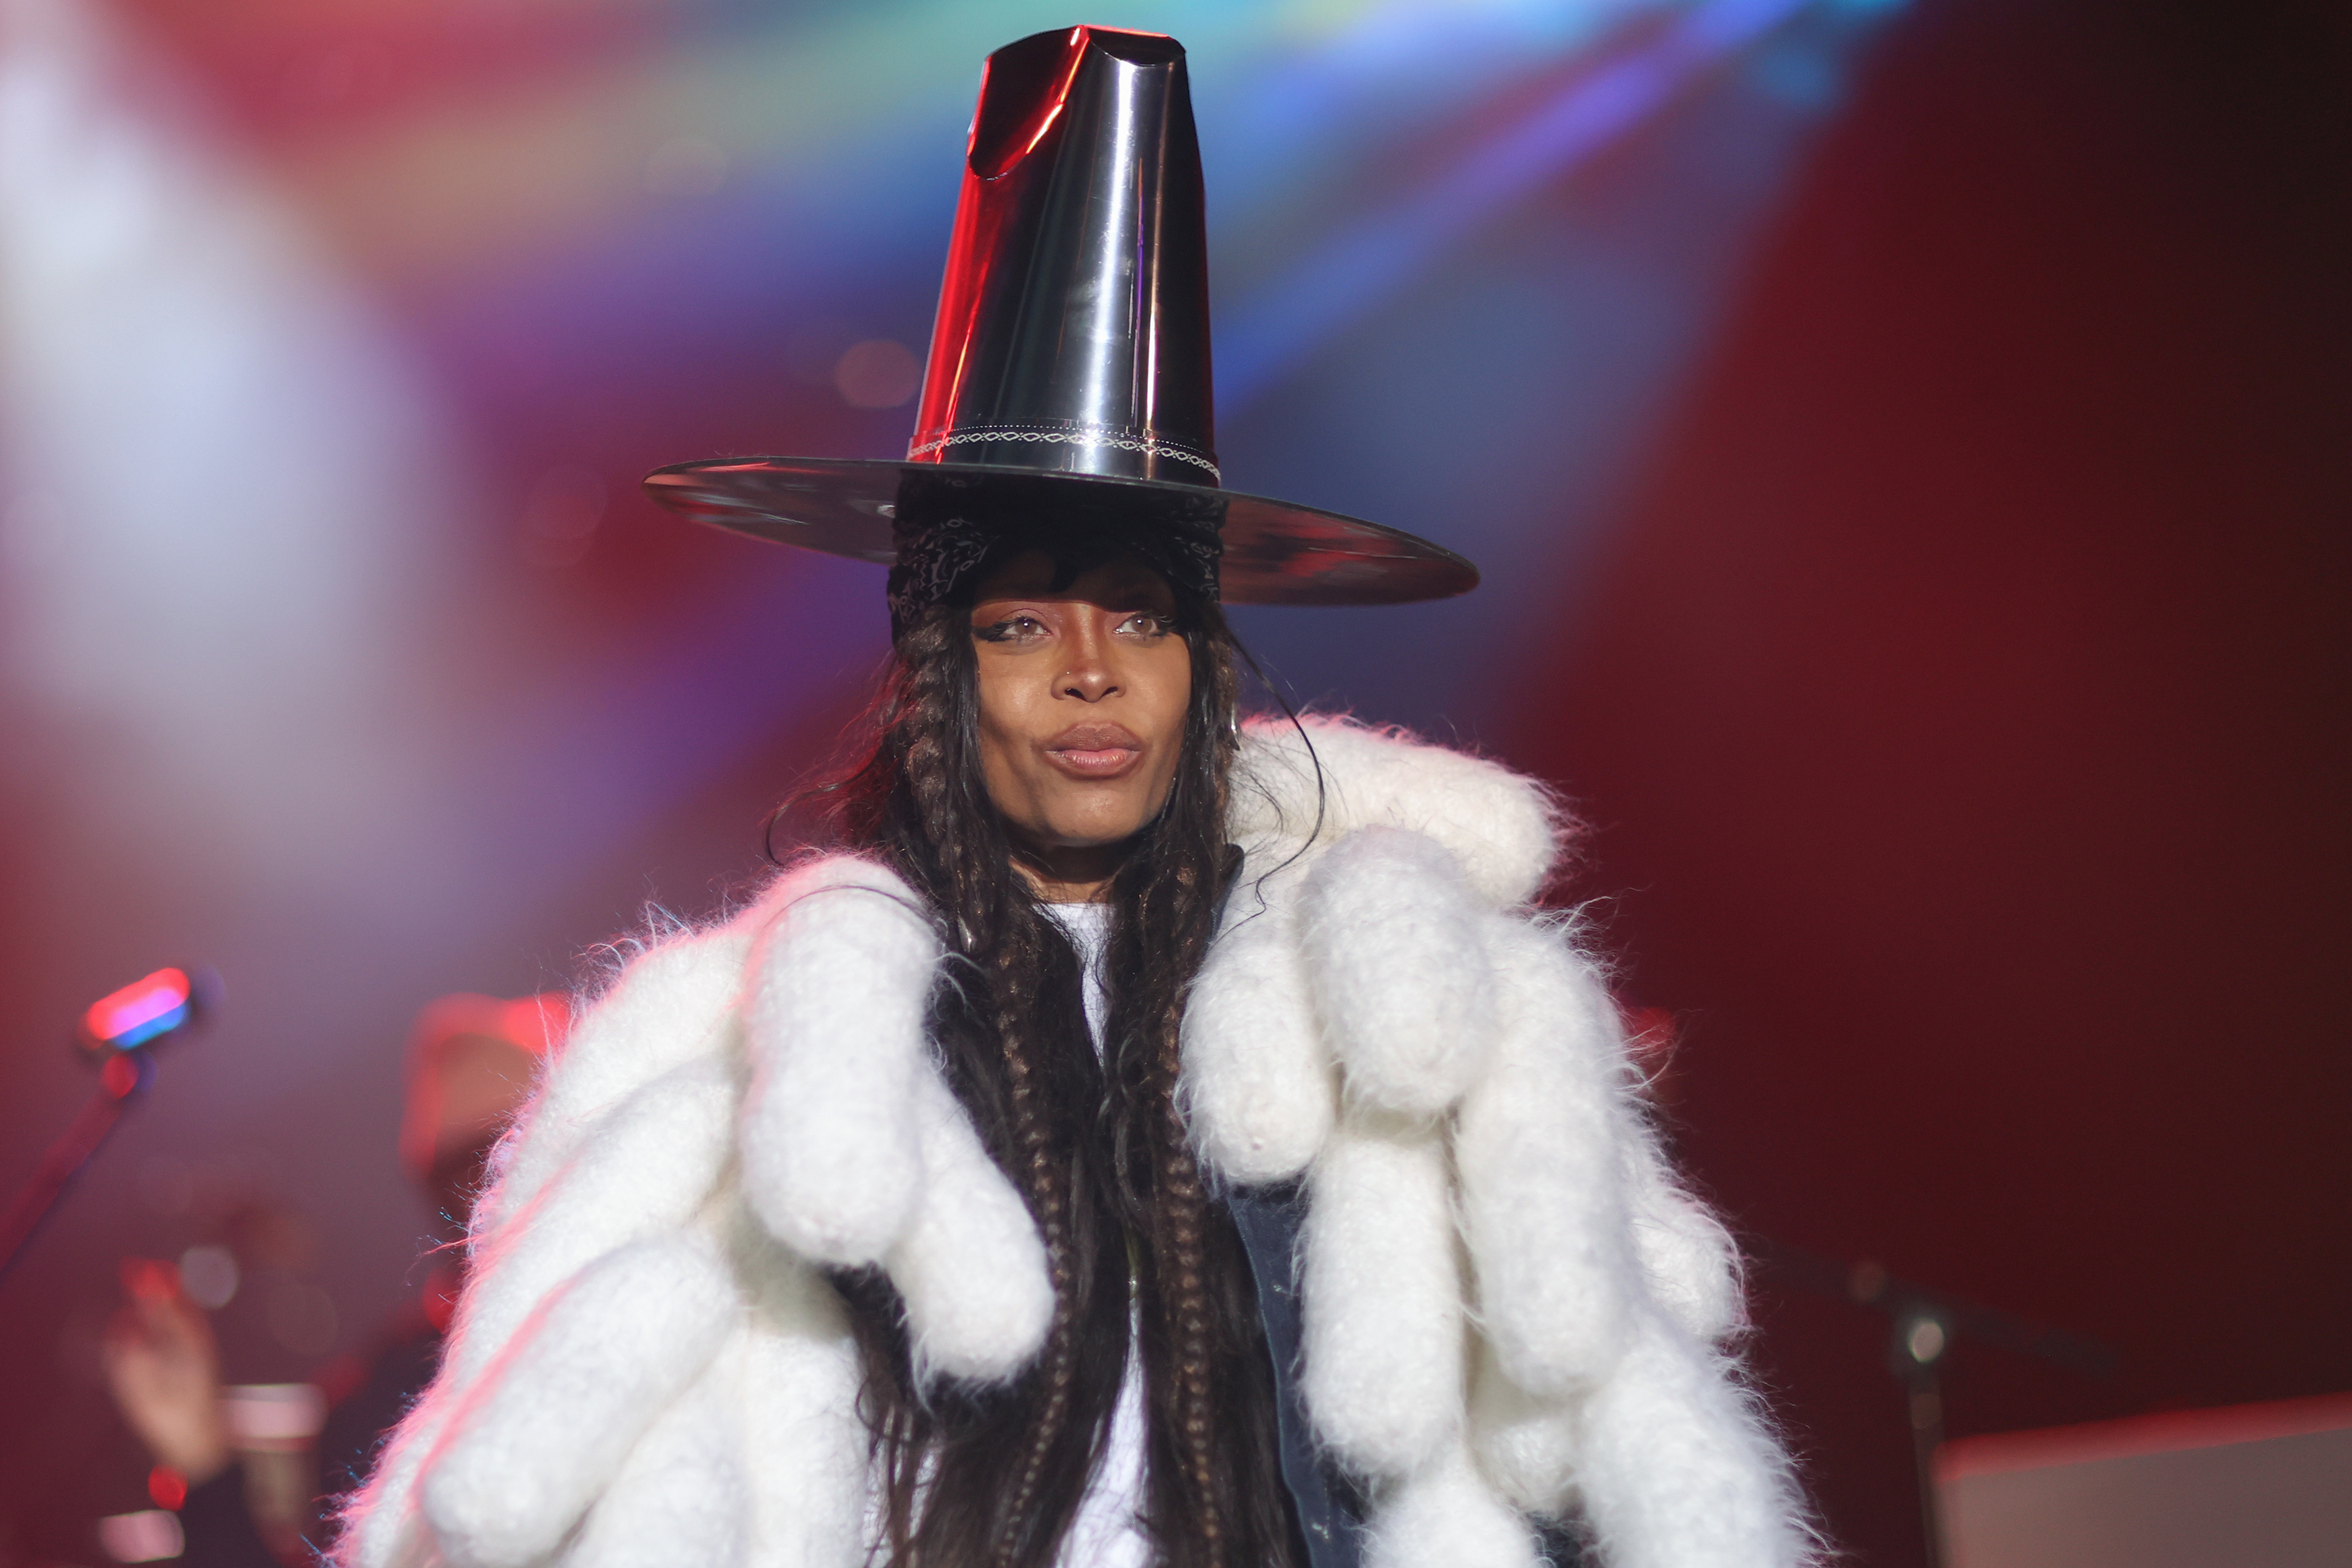 Erykah on stage in a silver wide brim hat with a tall top